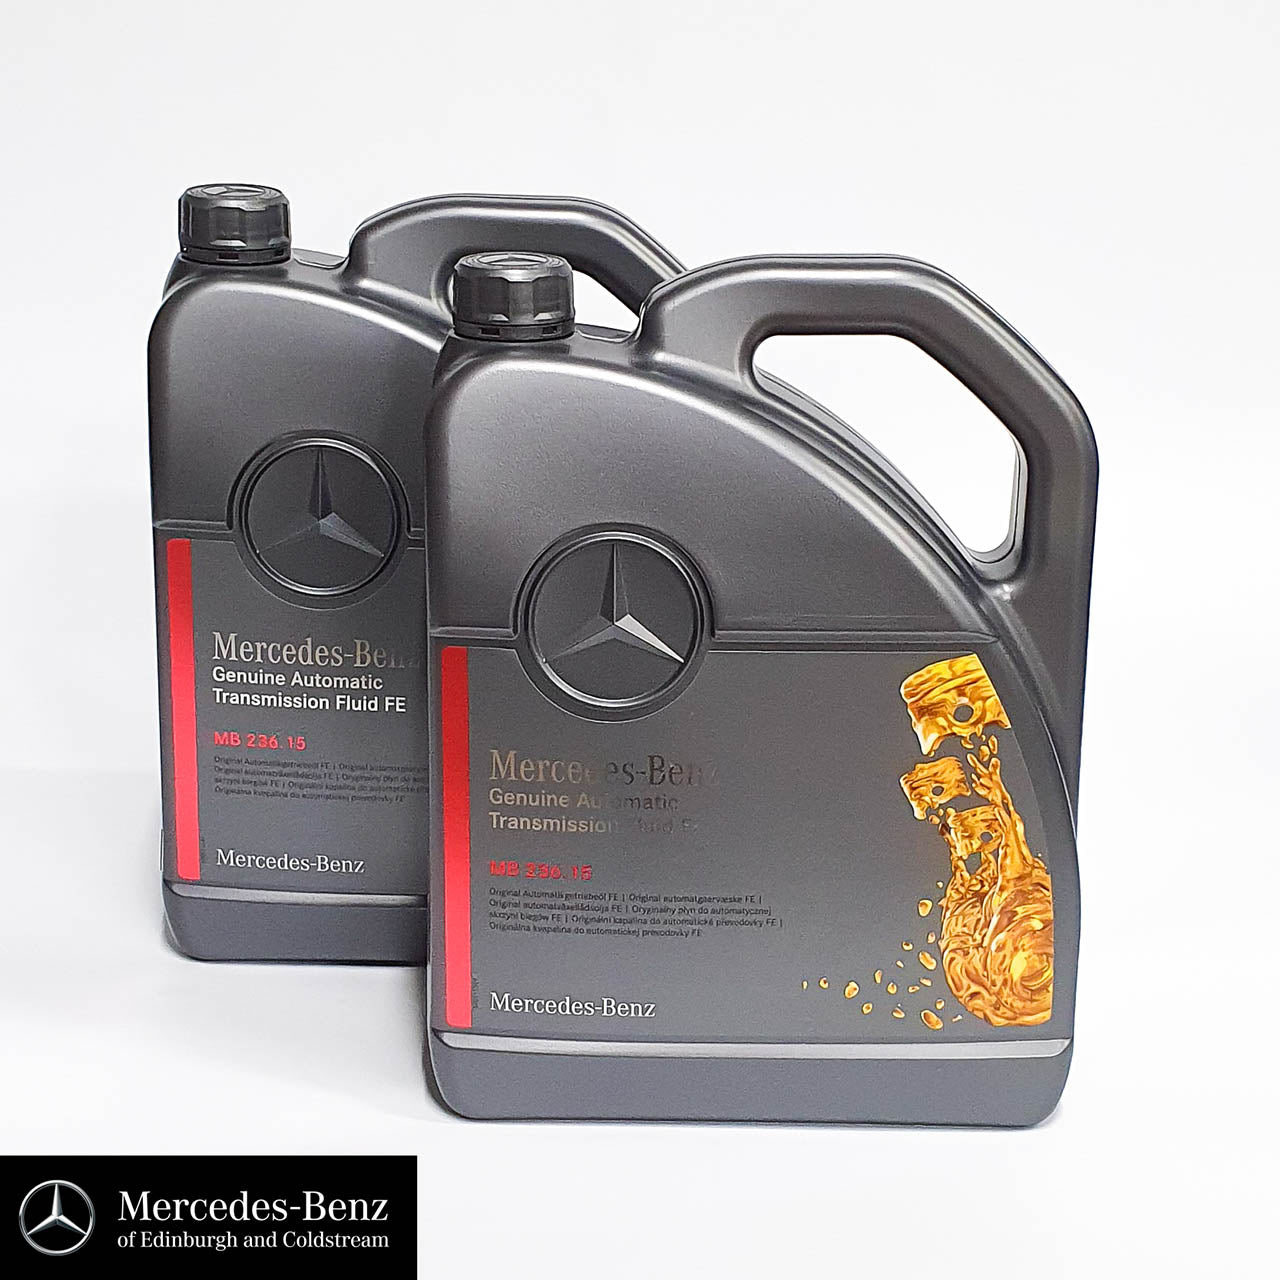 Genuine Mercedes-Benz 724.2 Automatic gearbox oil (BLUE) kit for conventional and hybrid cars A89 code